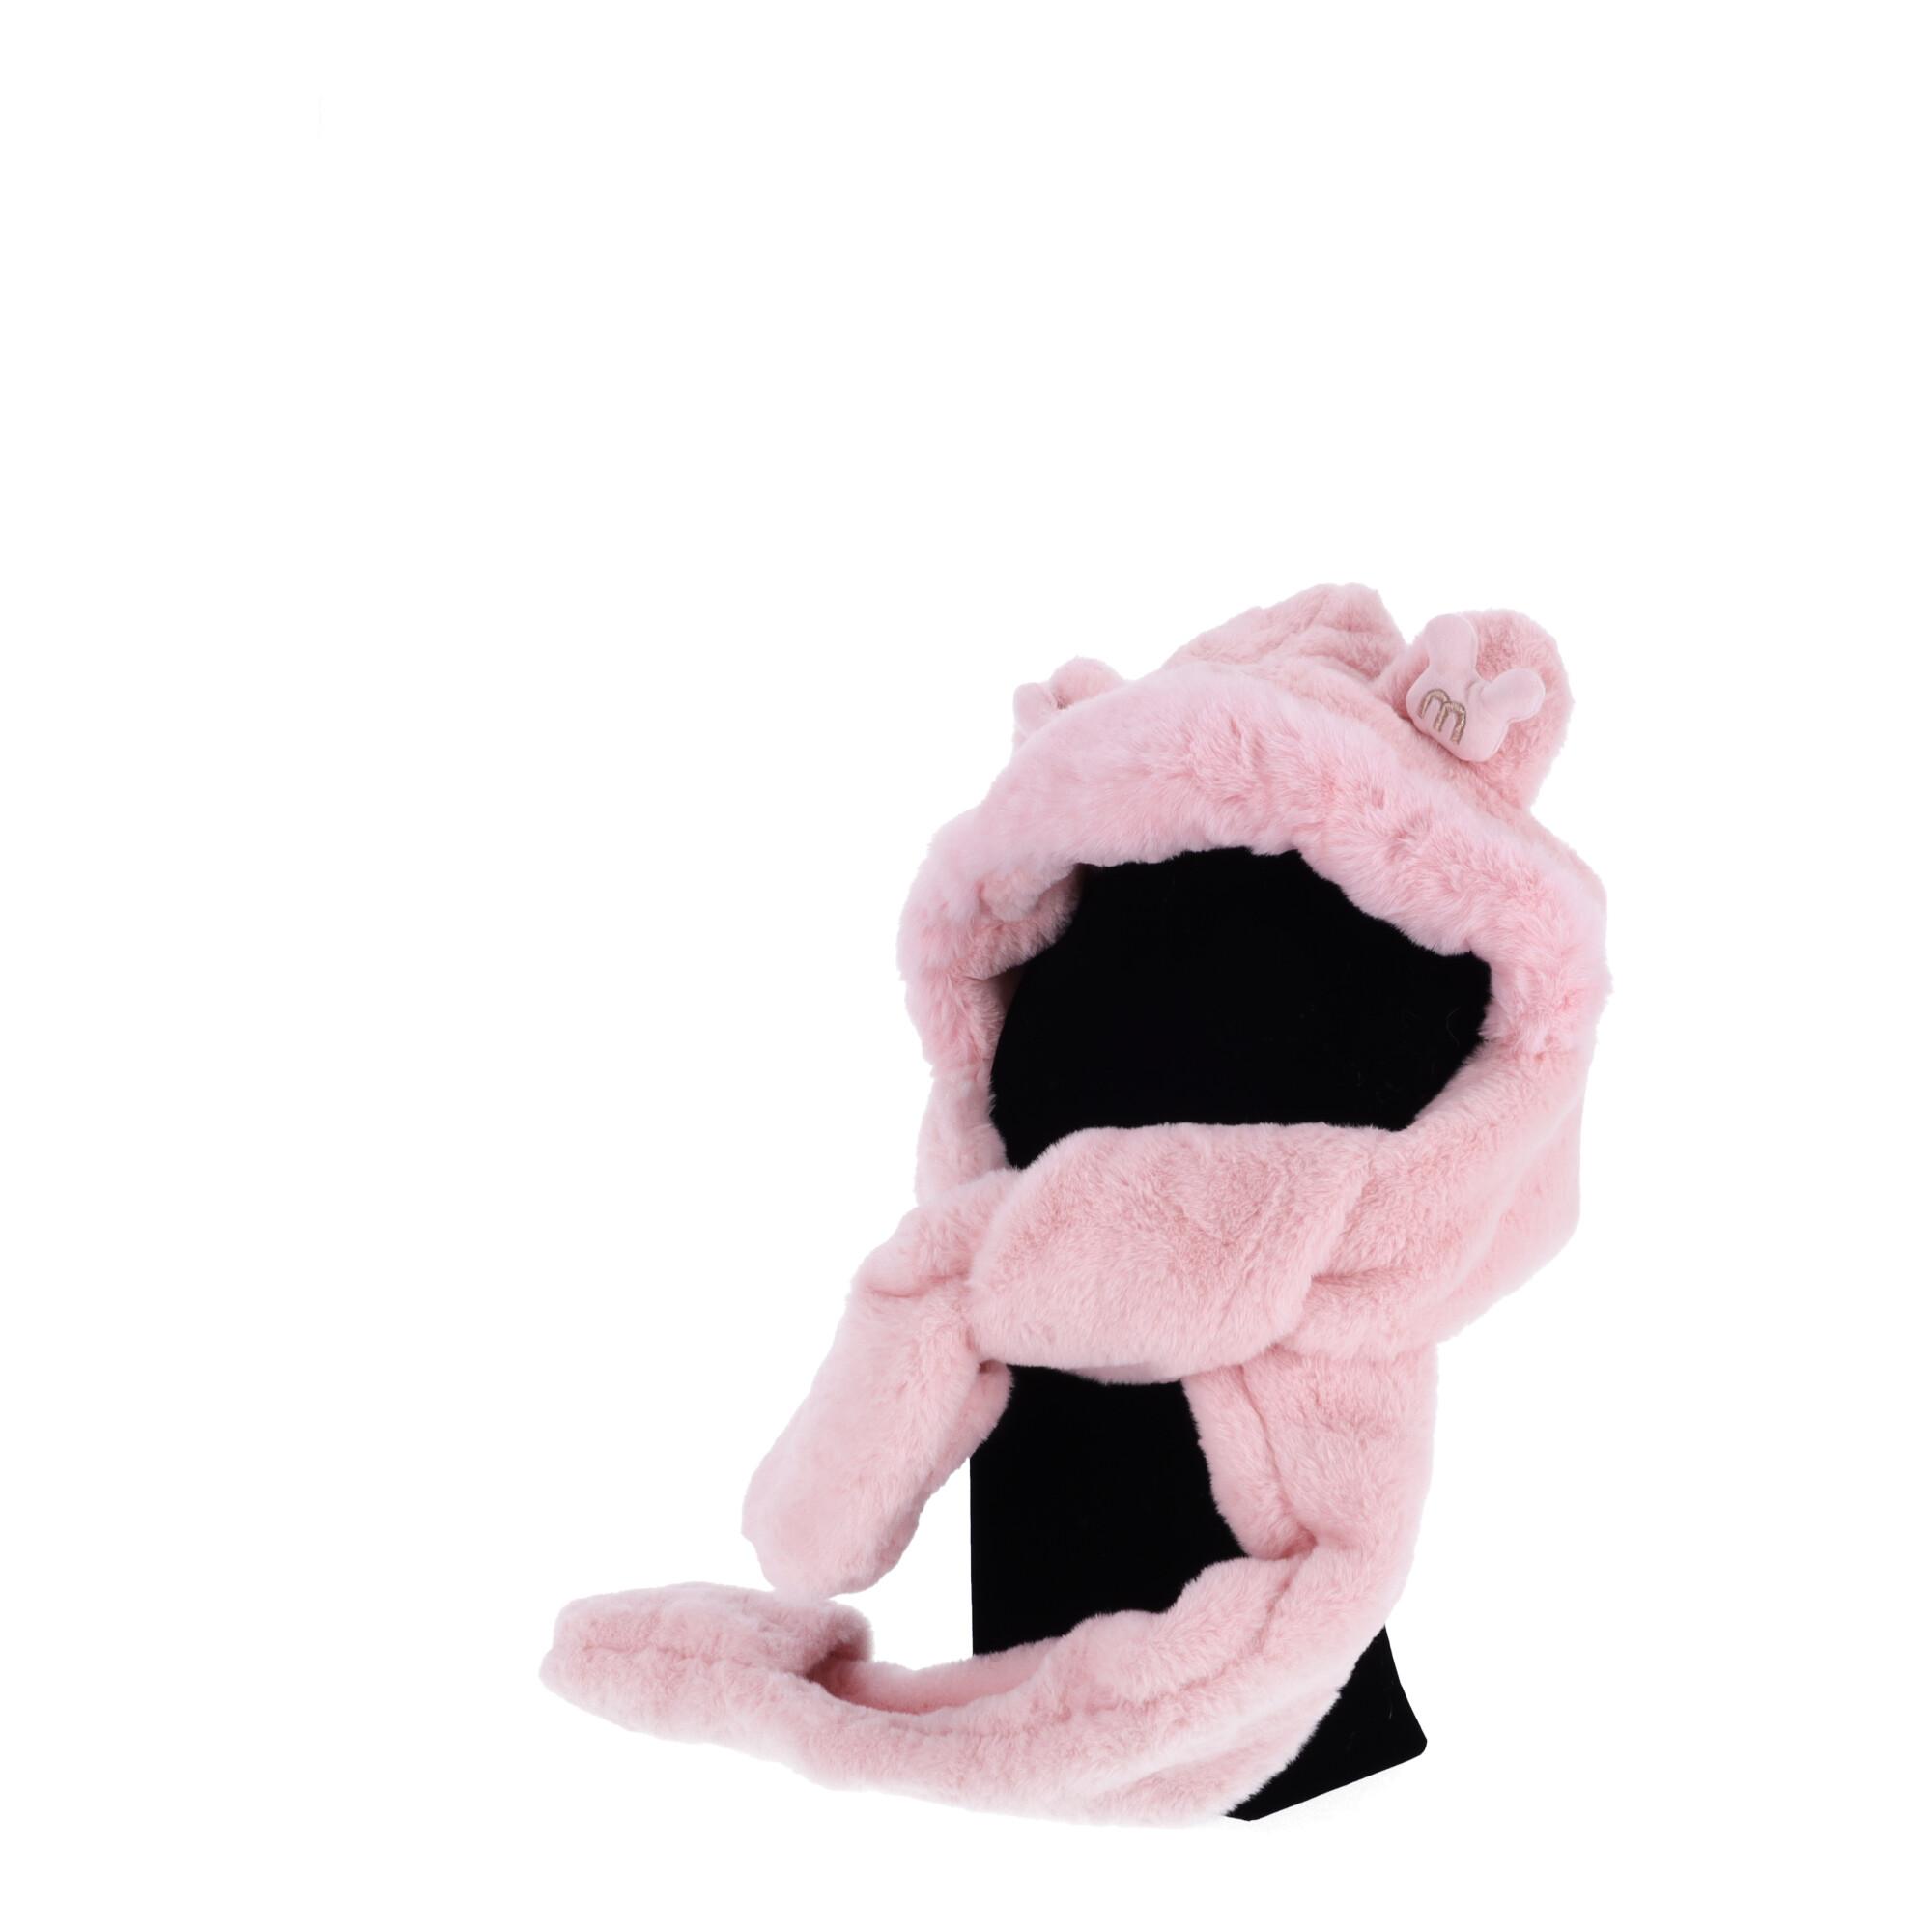 Children's plush hat with a scarf and 3in1 gloves for children from 2 to 12 years old - light pink